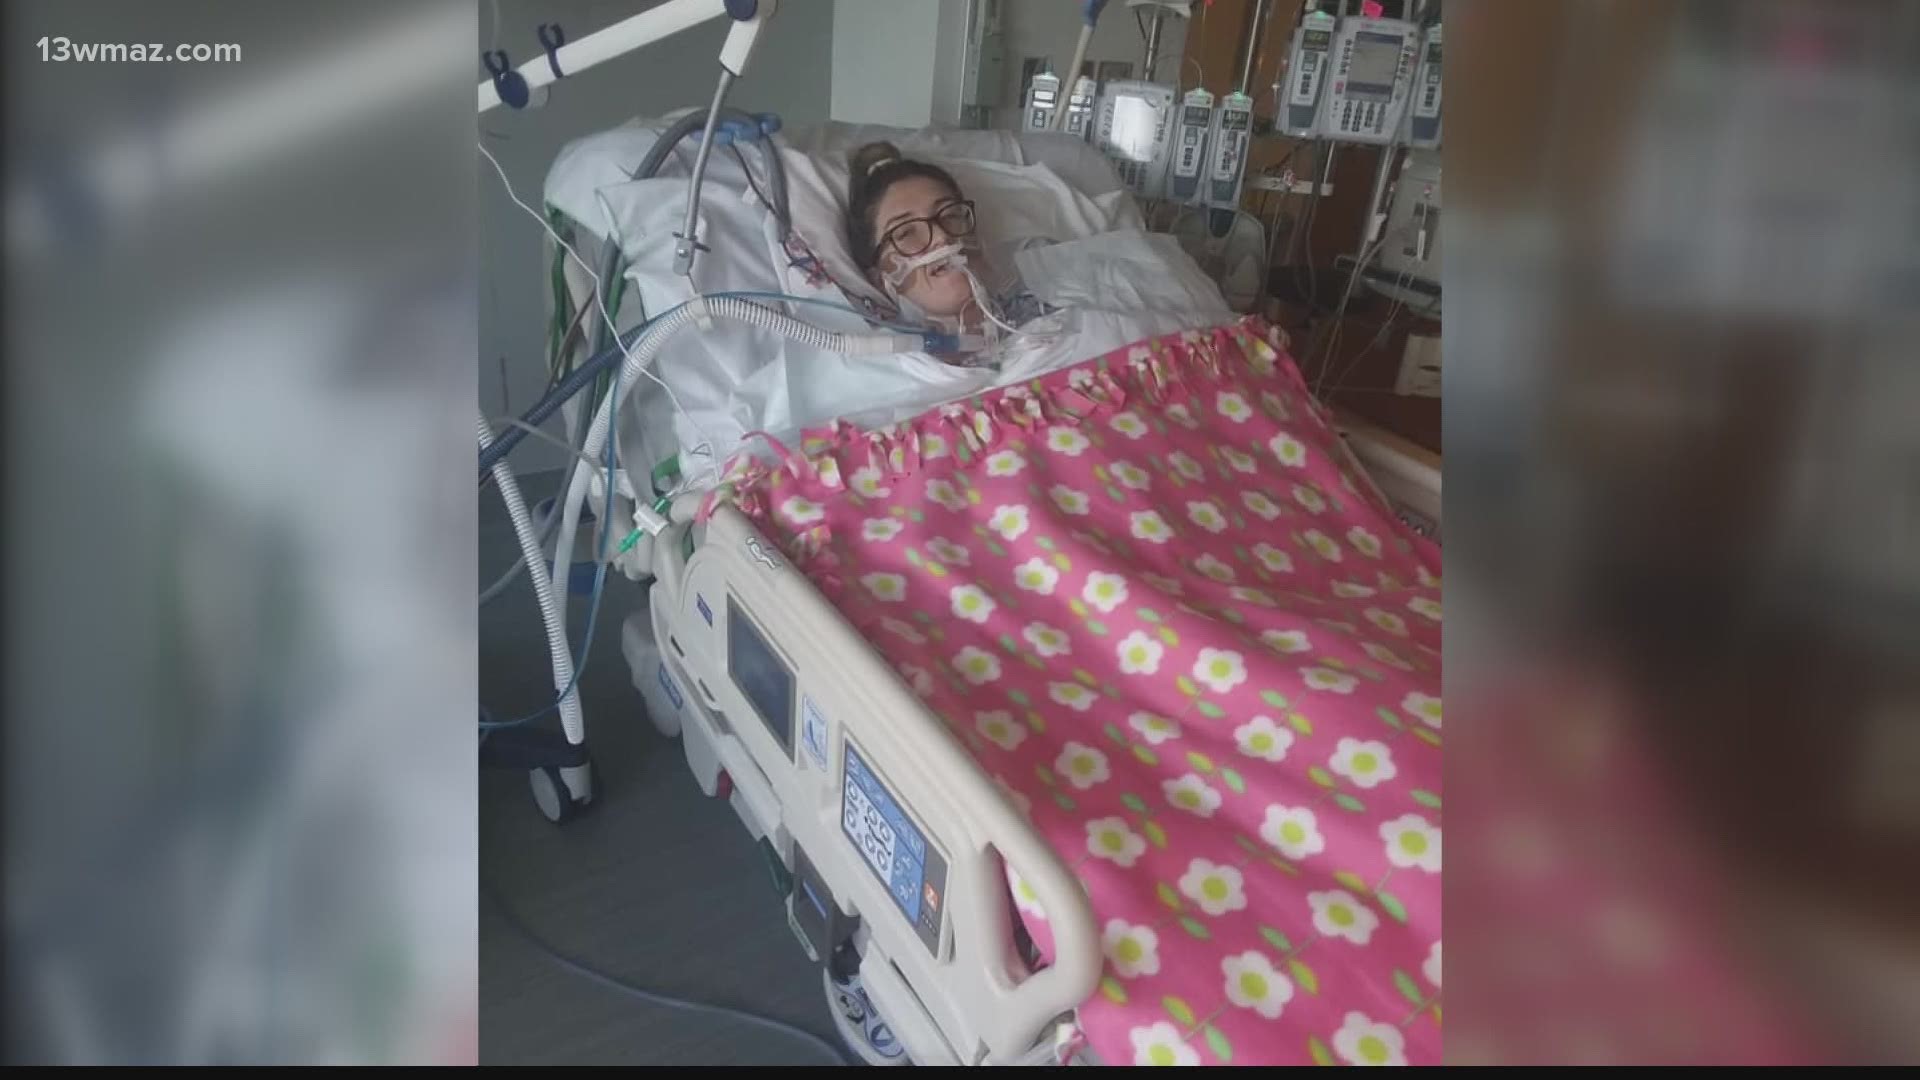 Morgan Walker has been on a ventilator since mid-July and doctors say she will eventually need a lung transplant